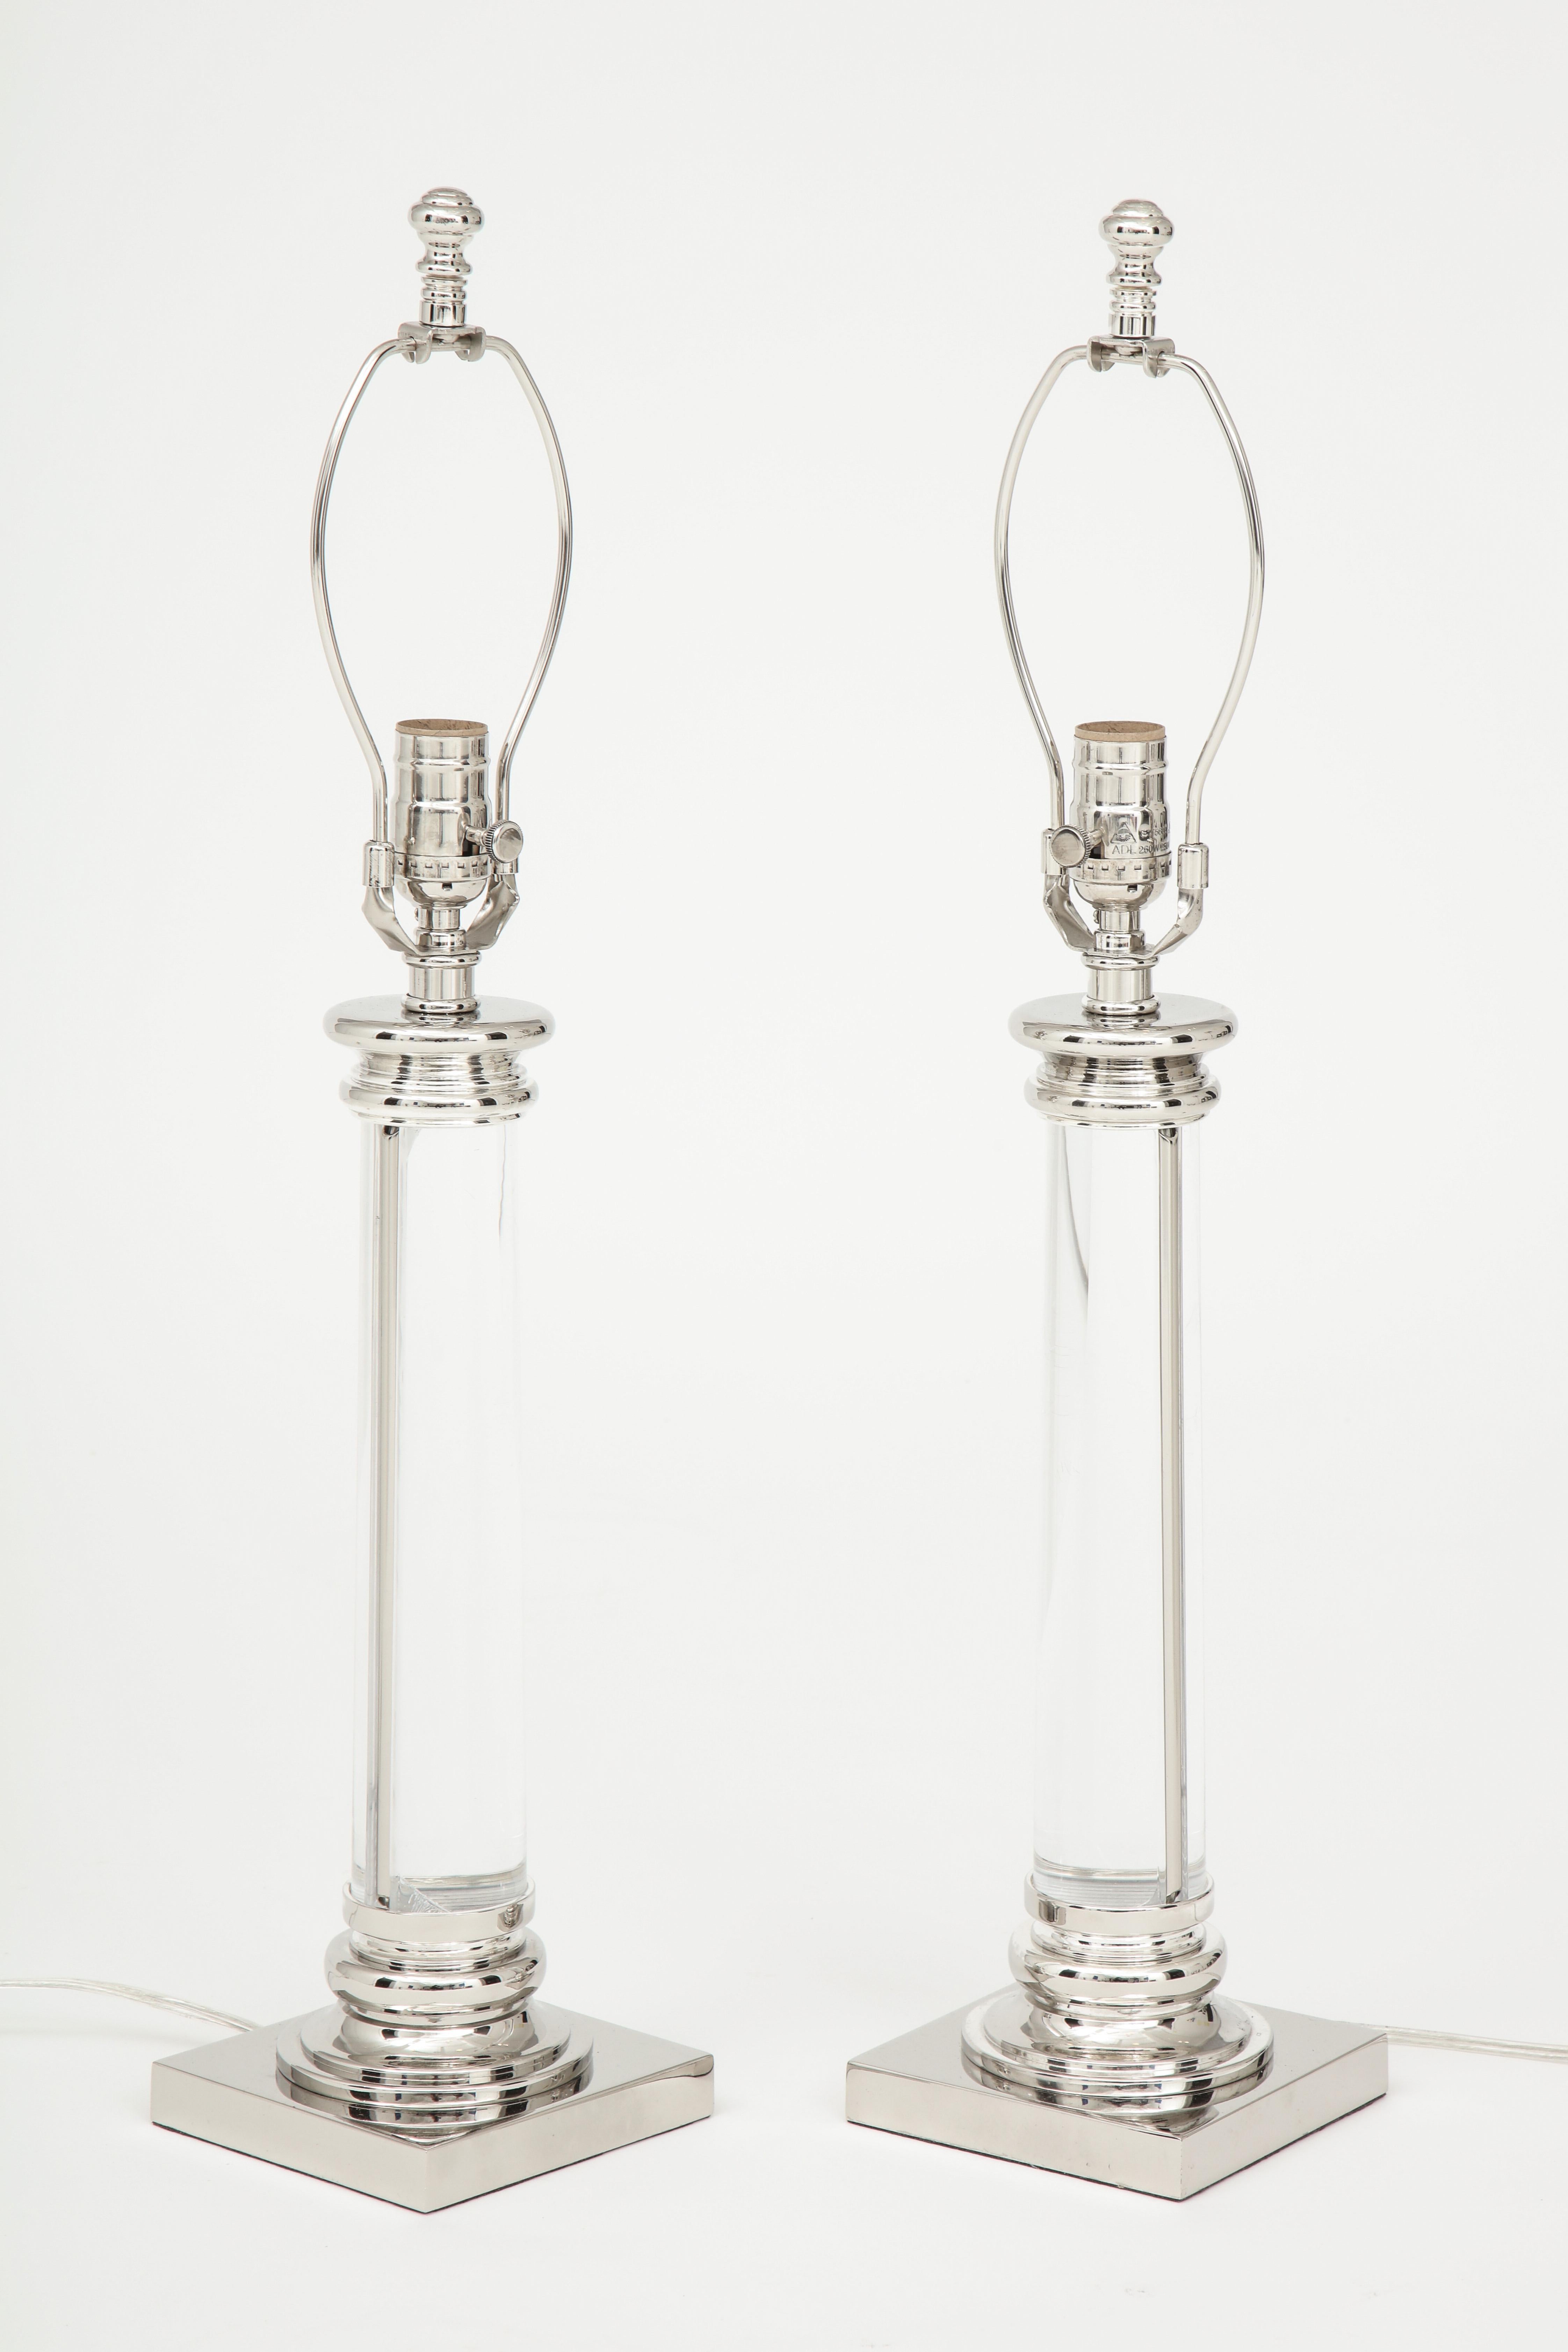 Pair of modernist glass column lamps with polished nickel base and decorative cap. Rewired for use in the USA, each using 1 Edison type bulb, 100W max.